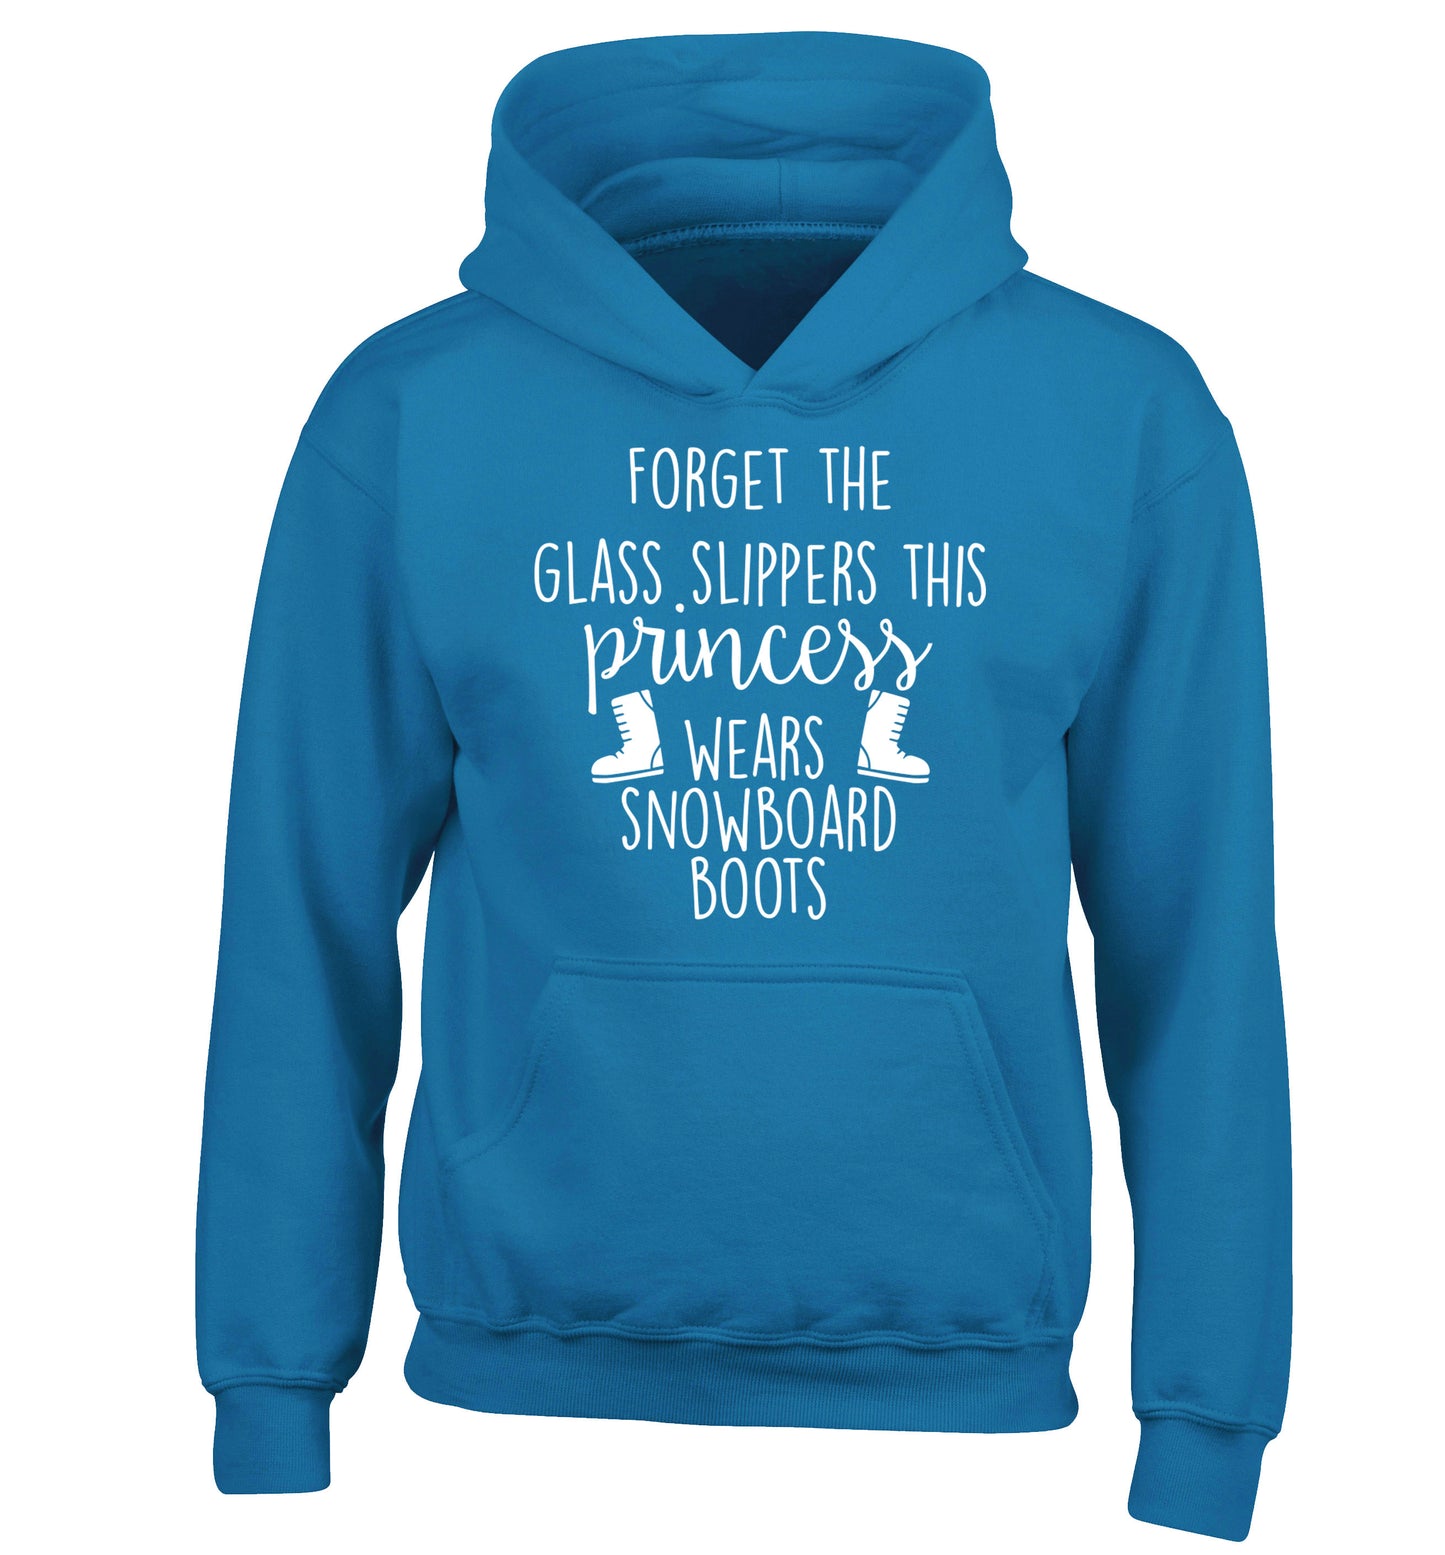 Forget the glass slippers this princess wears snowboard boots children's blue hoodie 12-14 Years